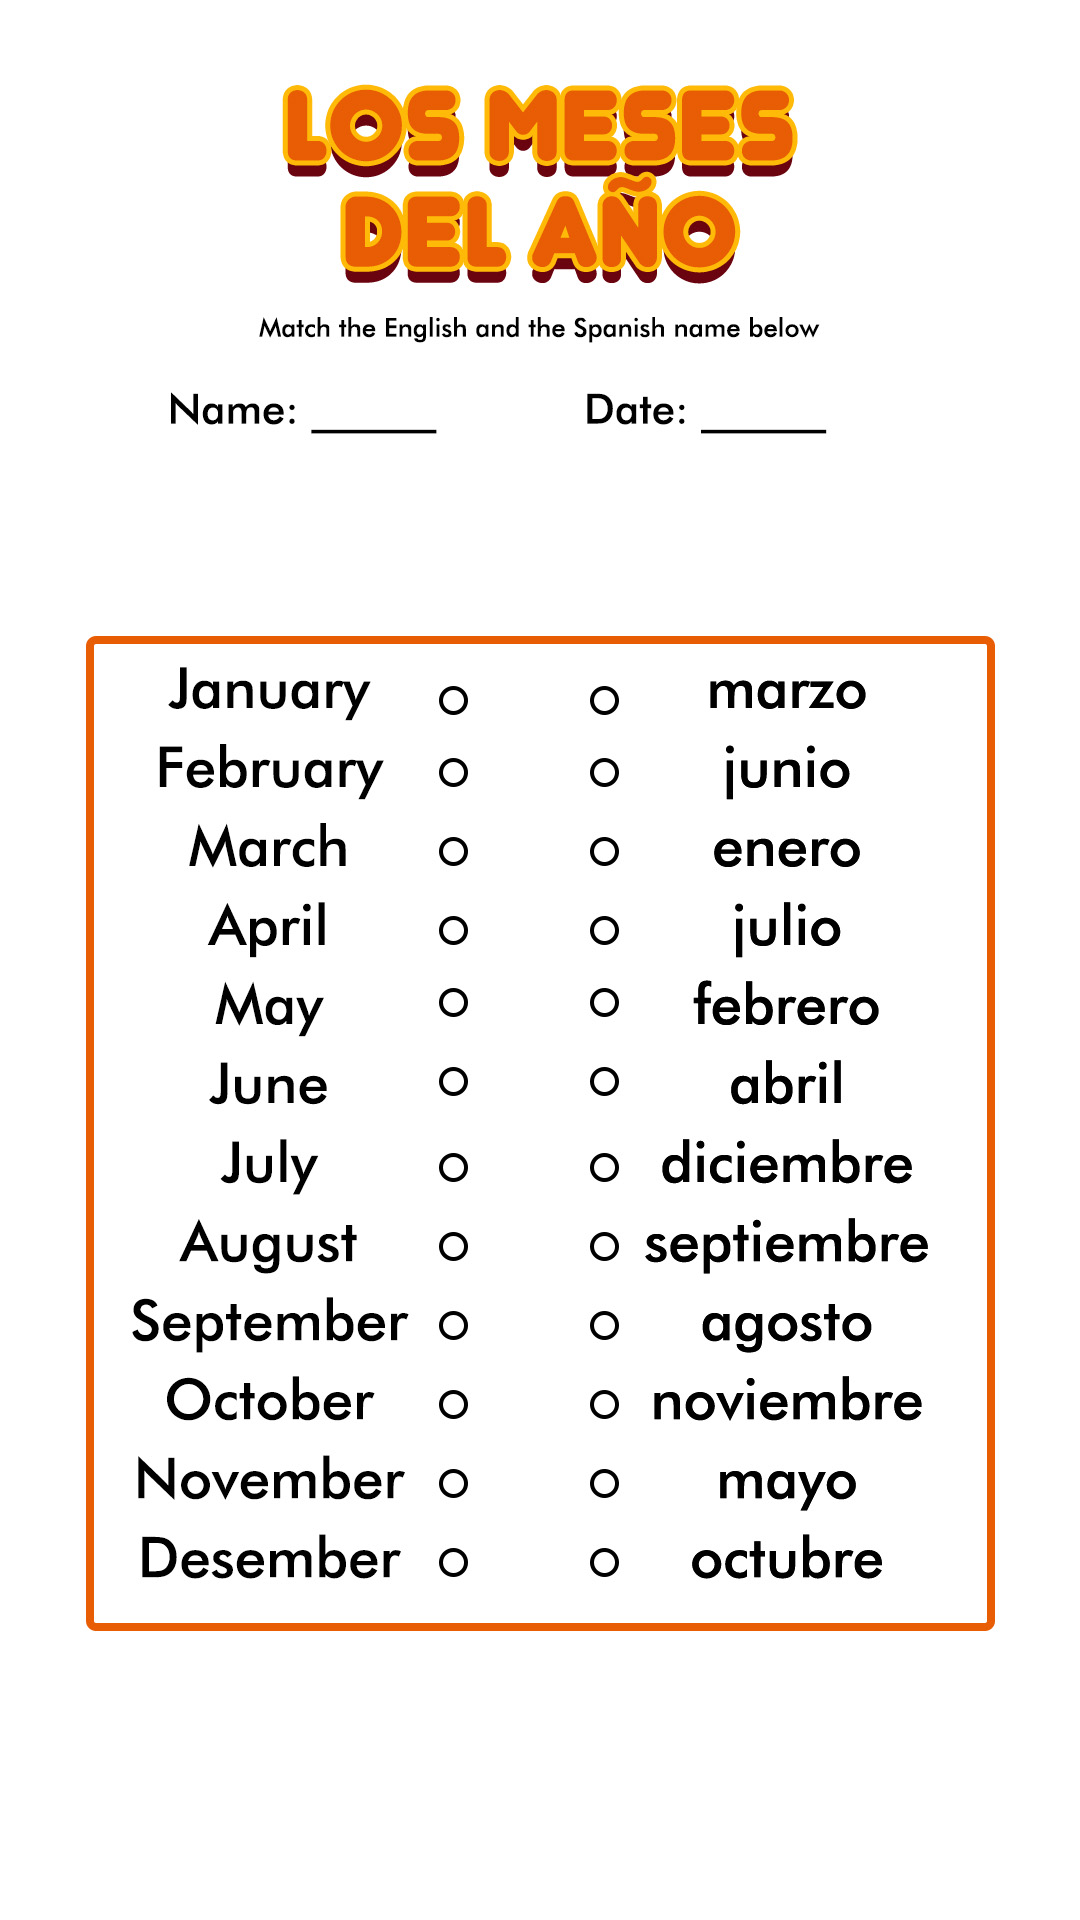 10-best-images-of-learning-the-months-of-the-year-worksheet-free-printable-spanish-worksheets